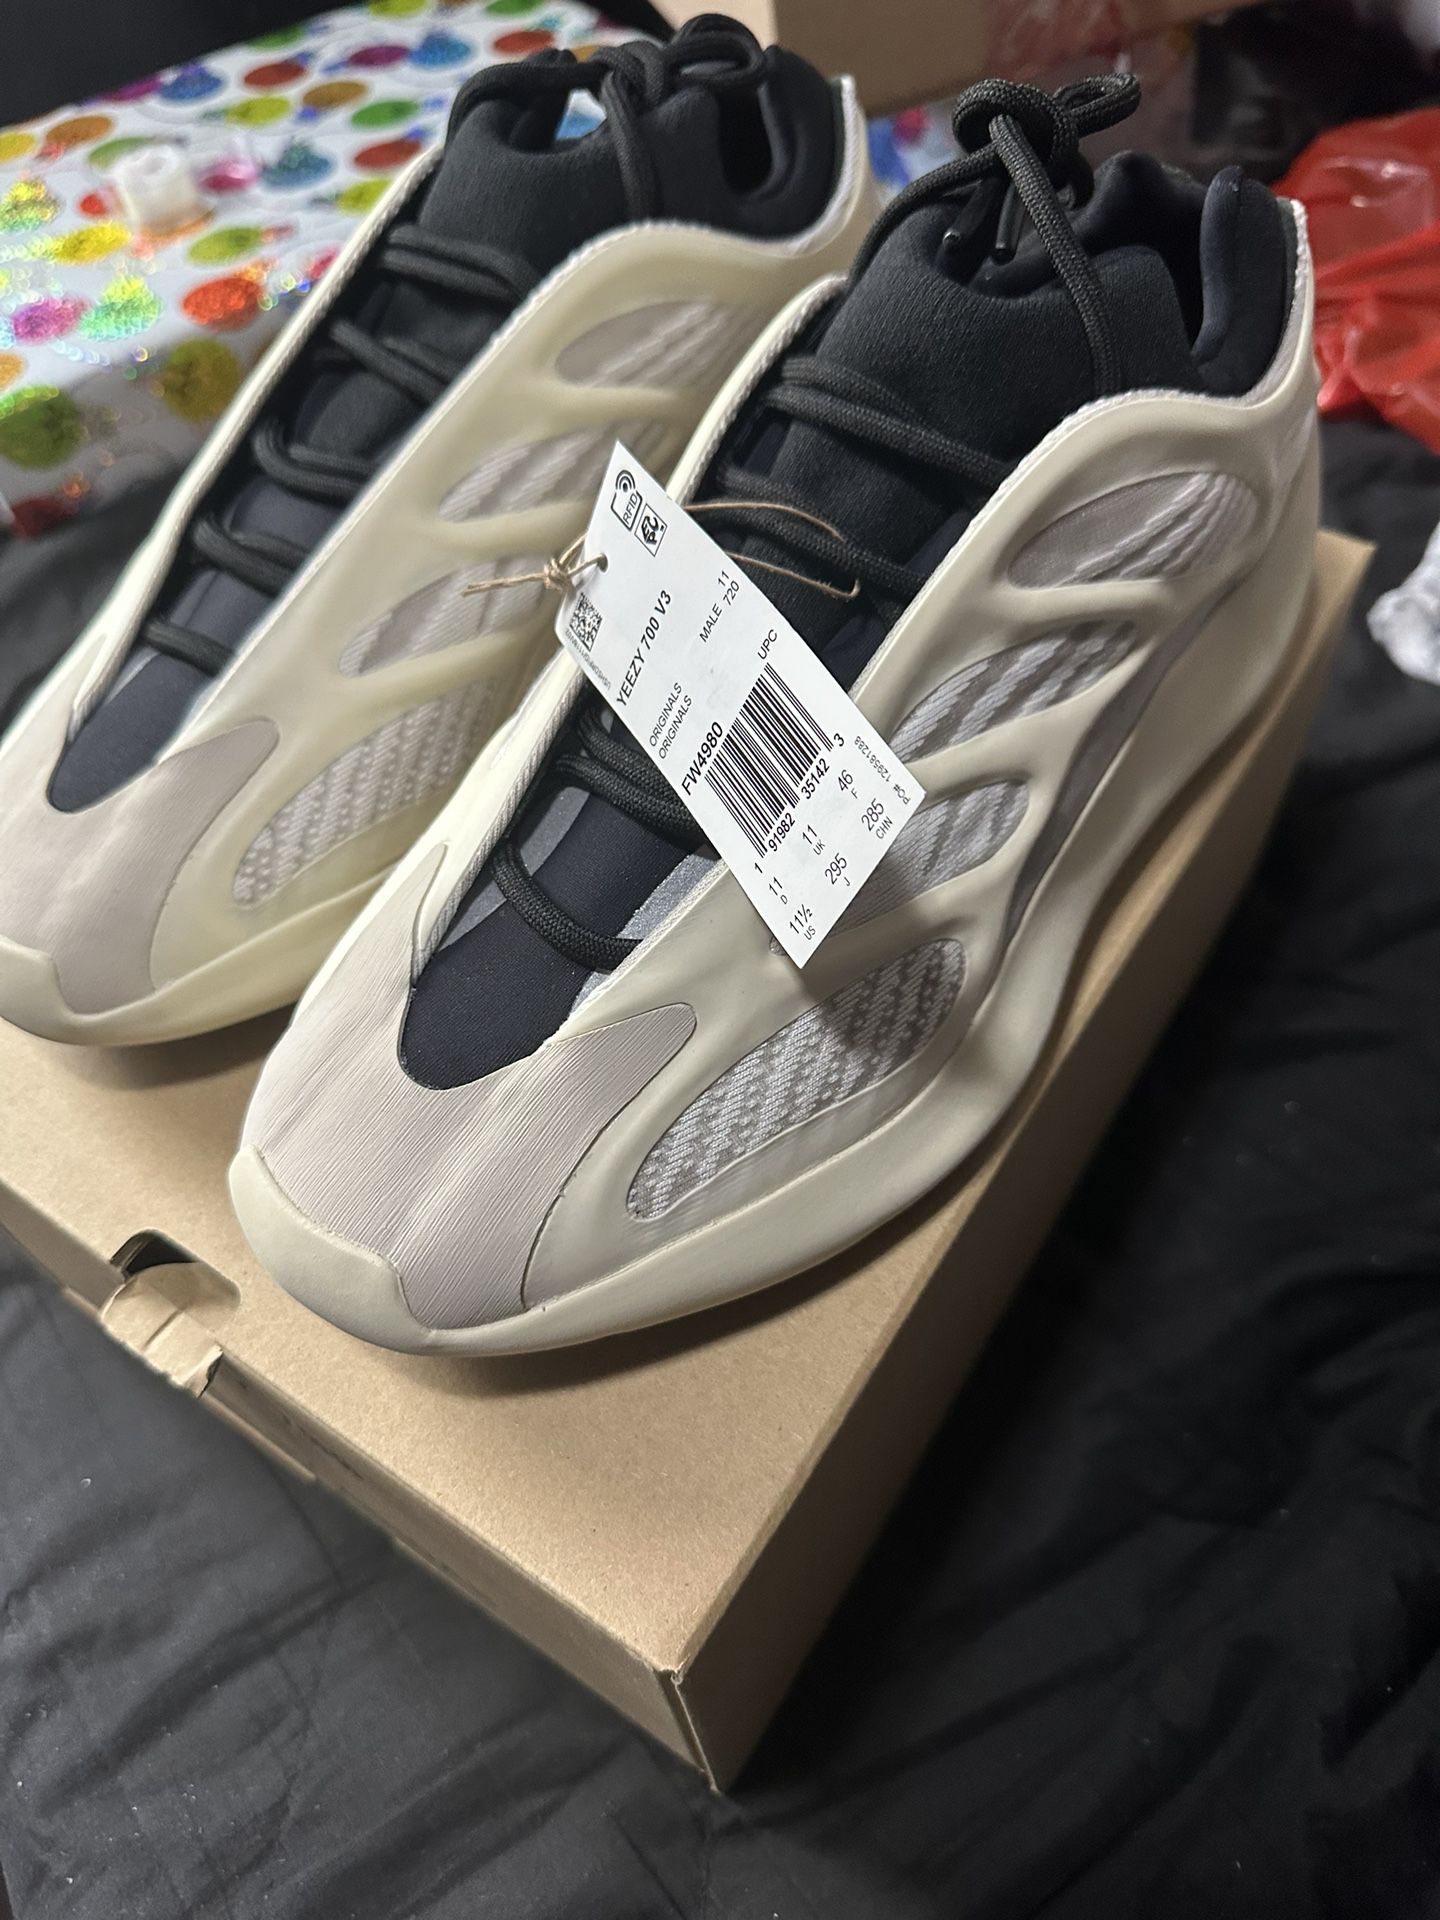 Yeezy 700V3 Azael, Size 11.5, BRAND for Sale in San Diego, OfferUp